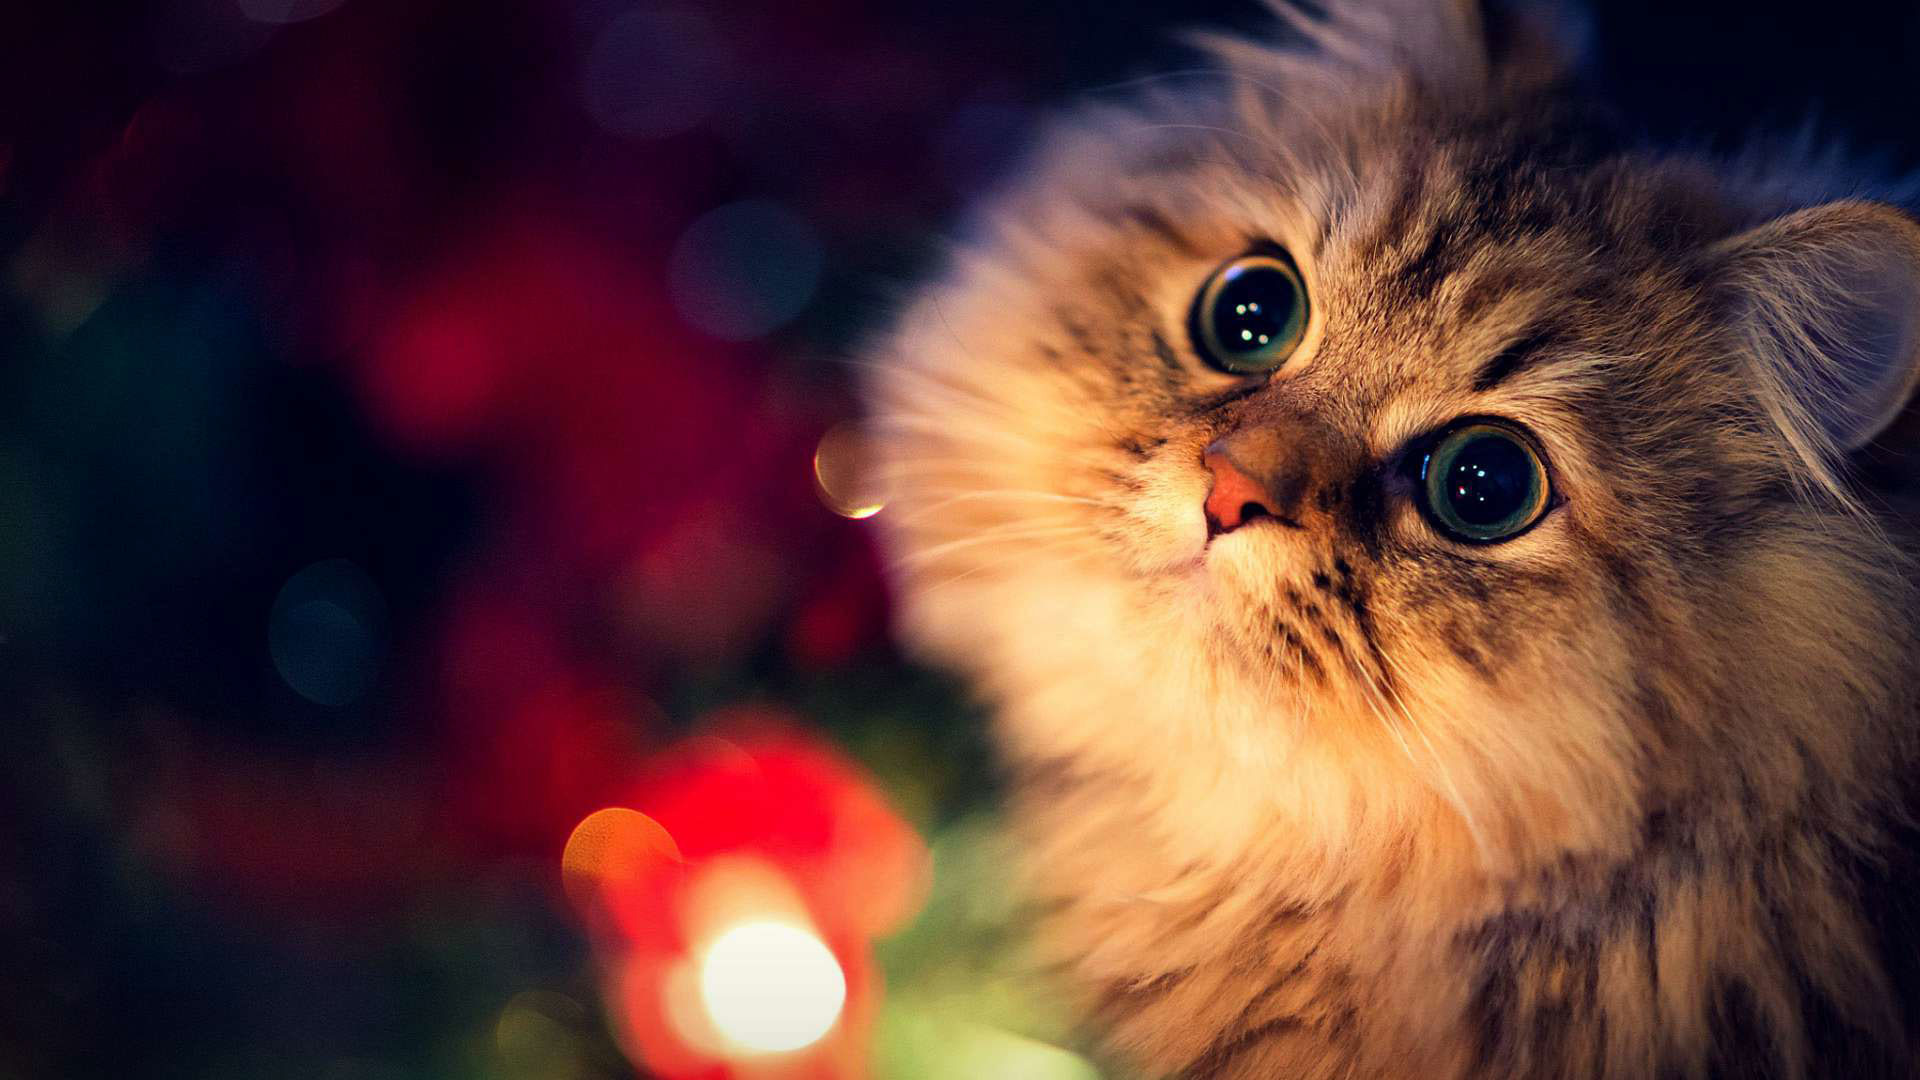 Cat full hd, hdtv, fhd, 1080p wallpapers hd, desktop backgrounds 1920x1080,  images and pictures